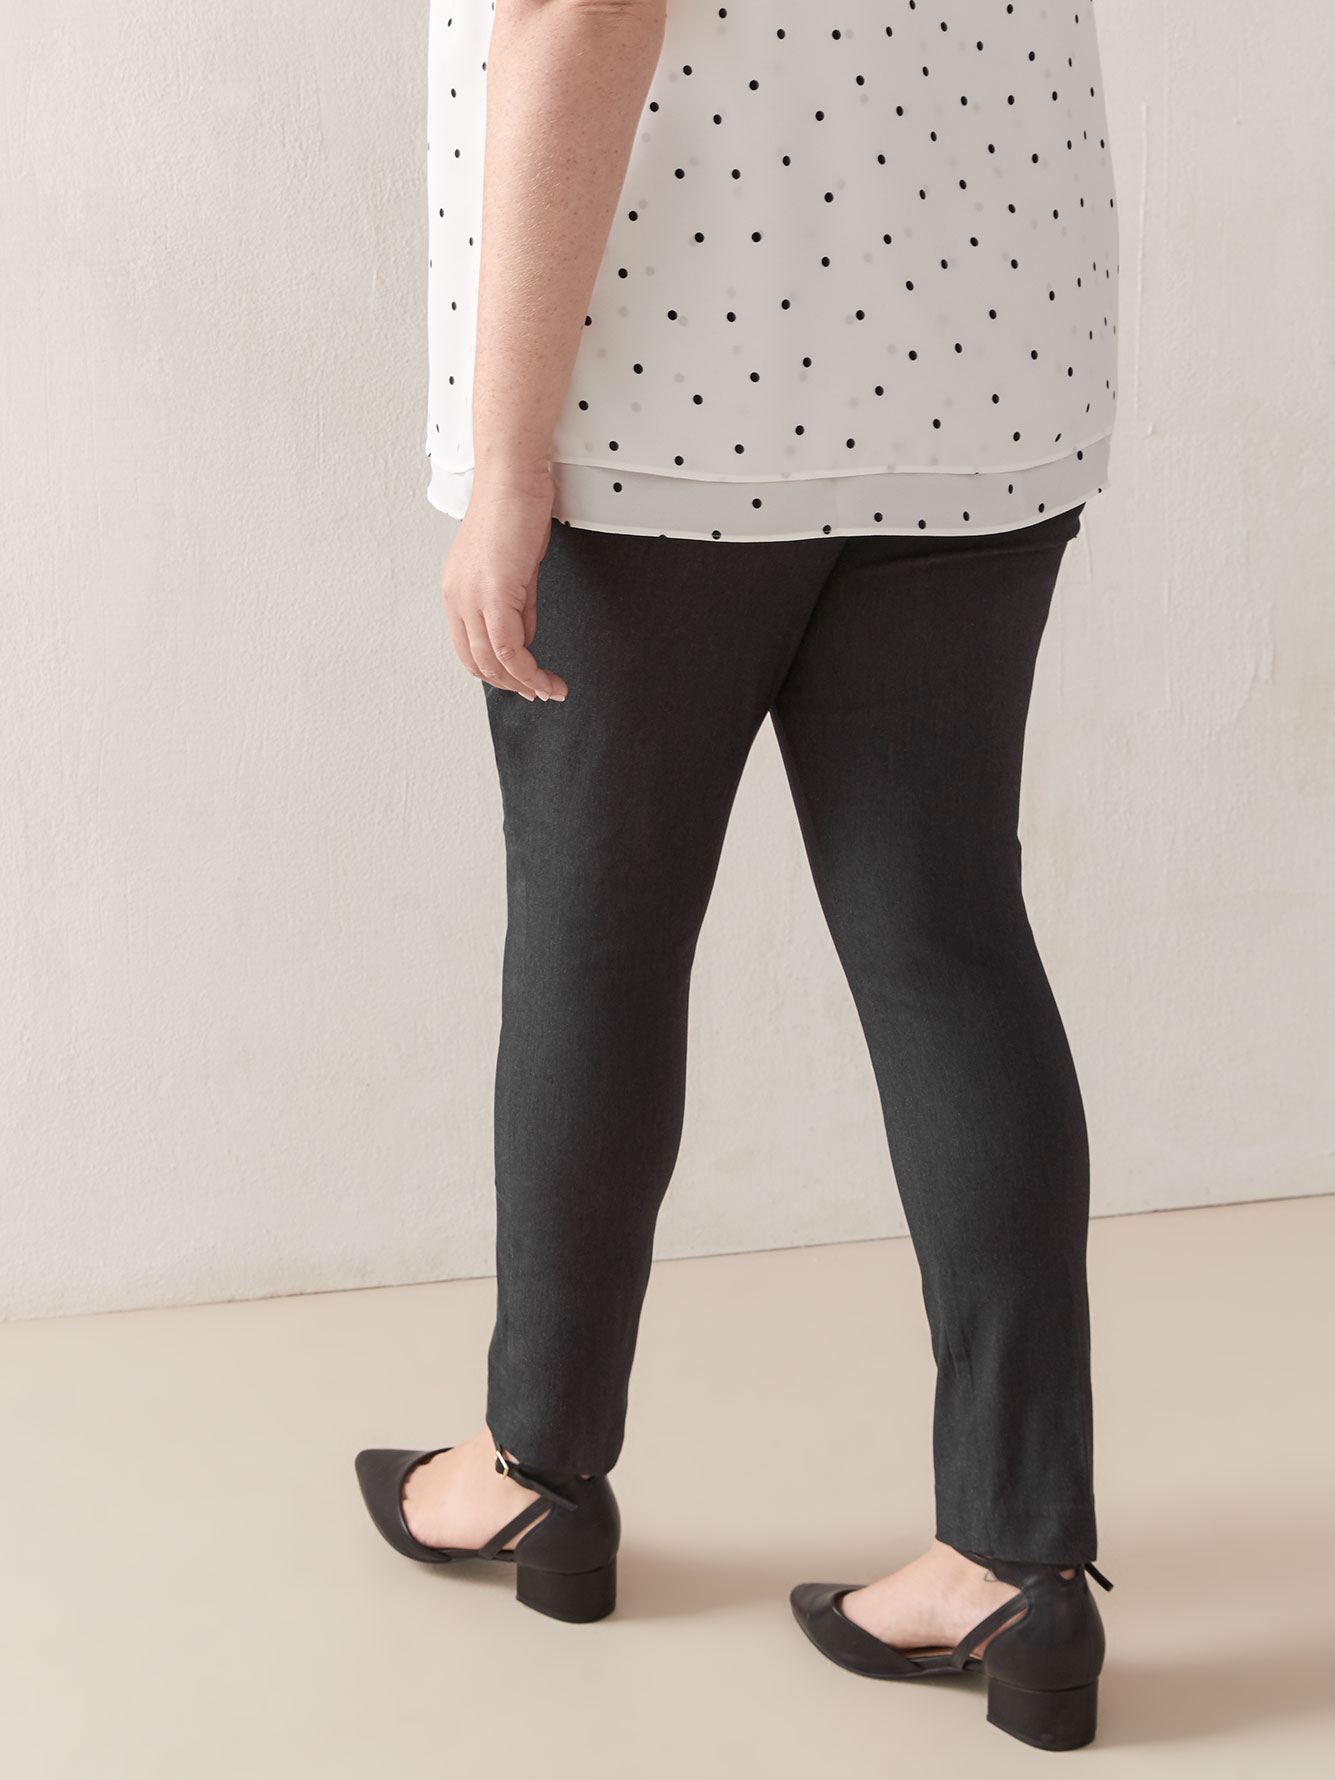 Savvy Fit, Skinny Pant - In Every Story | Penningtons